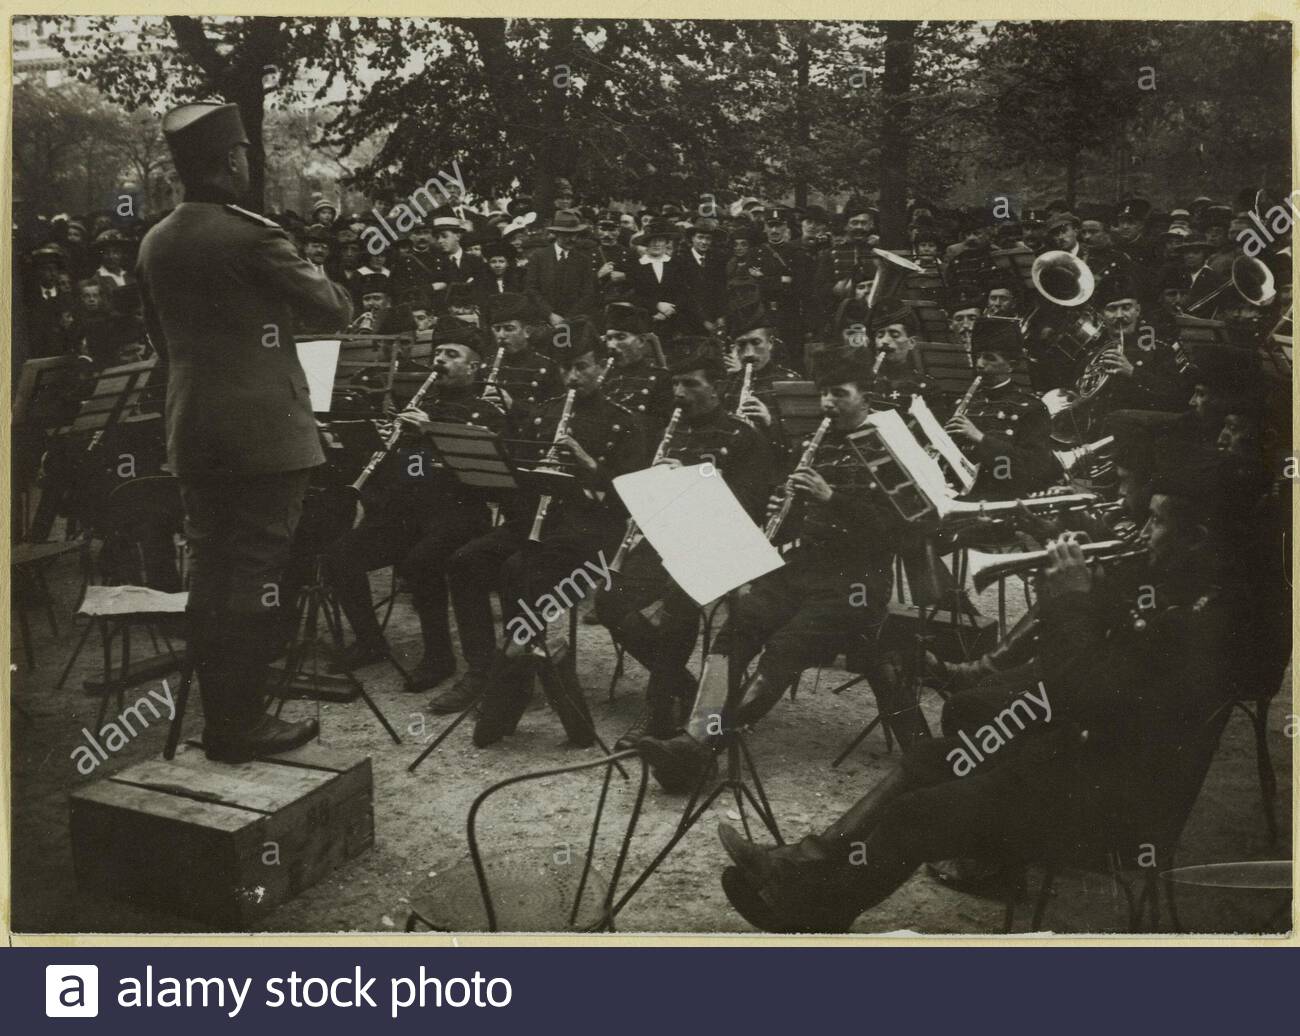 the serbian music in the garden of the royal palace musicians serbian musicians playing music in the garden of the palais royal the 1st arrondissement paris october 1916 anonyme la musique serbe au jardin du palais royal les musiciens musiciens serbes jouant de la musique au jardin du palais royal 1er arrondissement paris octobre 1916 tirage au glatino bromure dargent 01 octobre 1916 01 octobre 1916 paris muse carnavalet 2B8KGPG